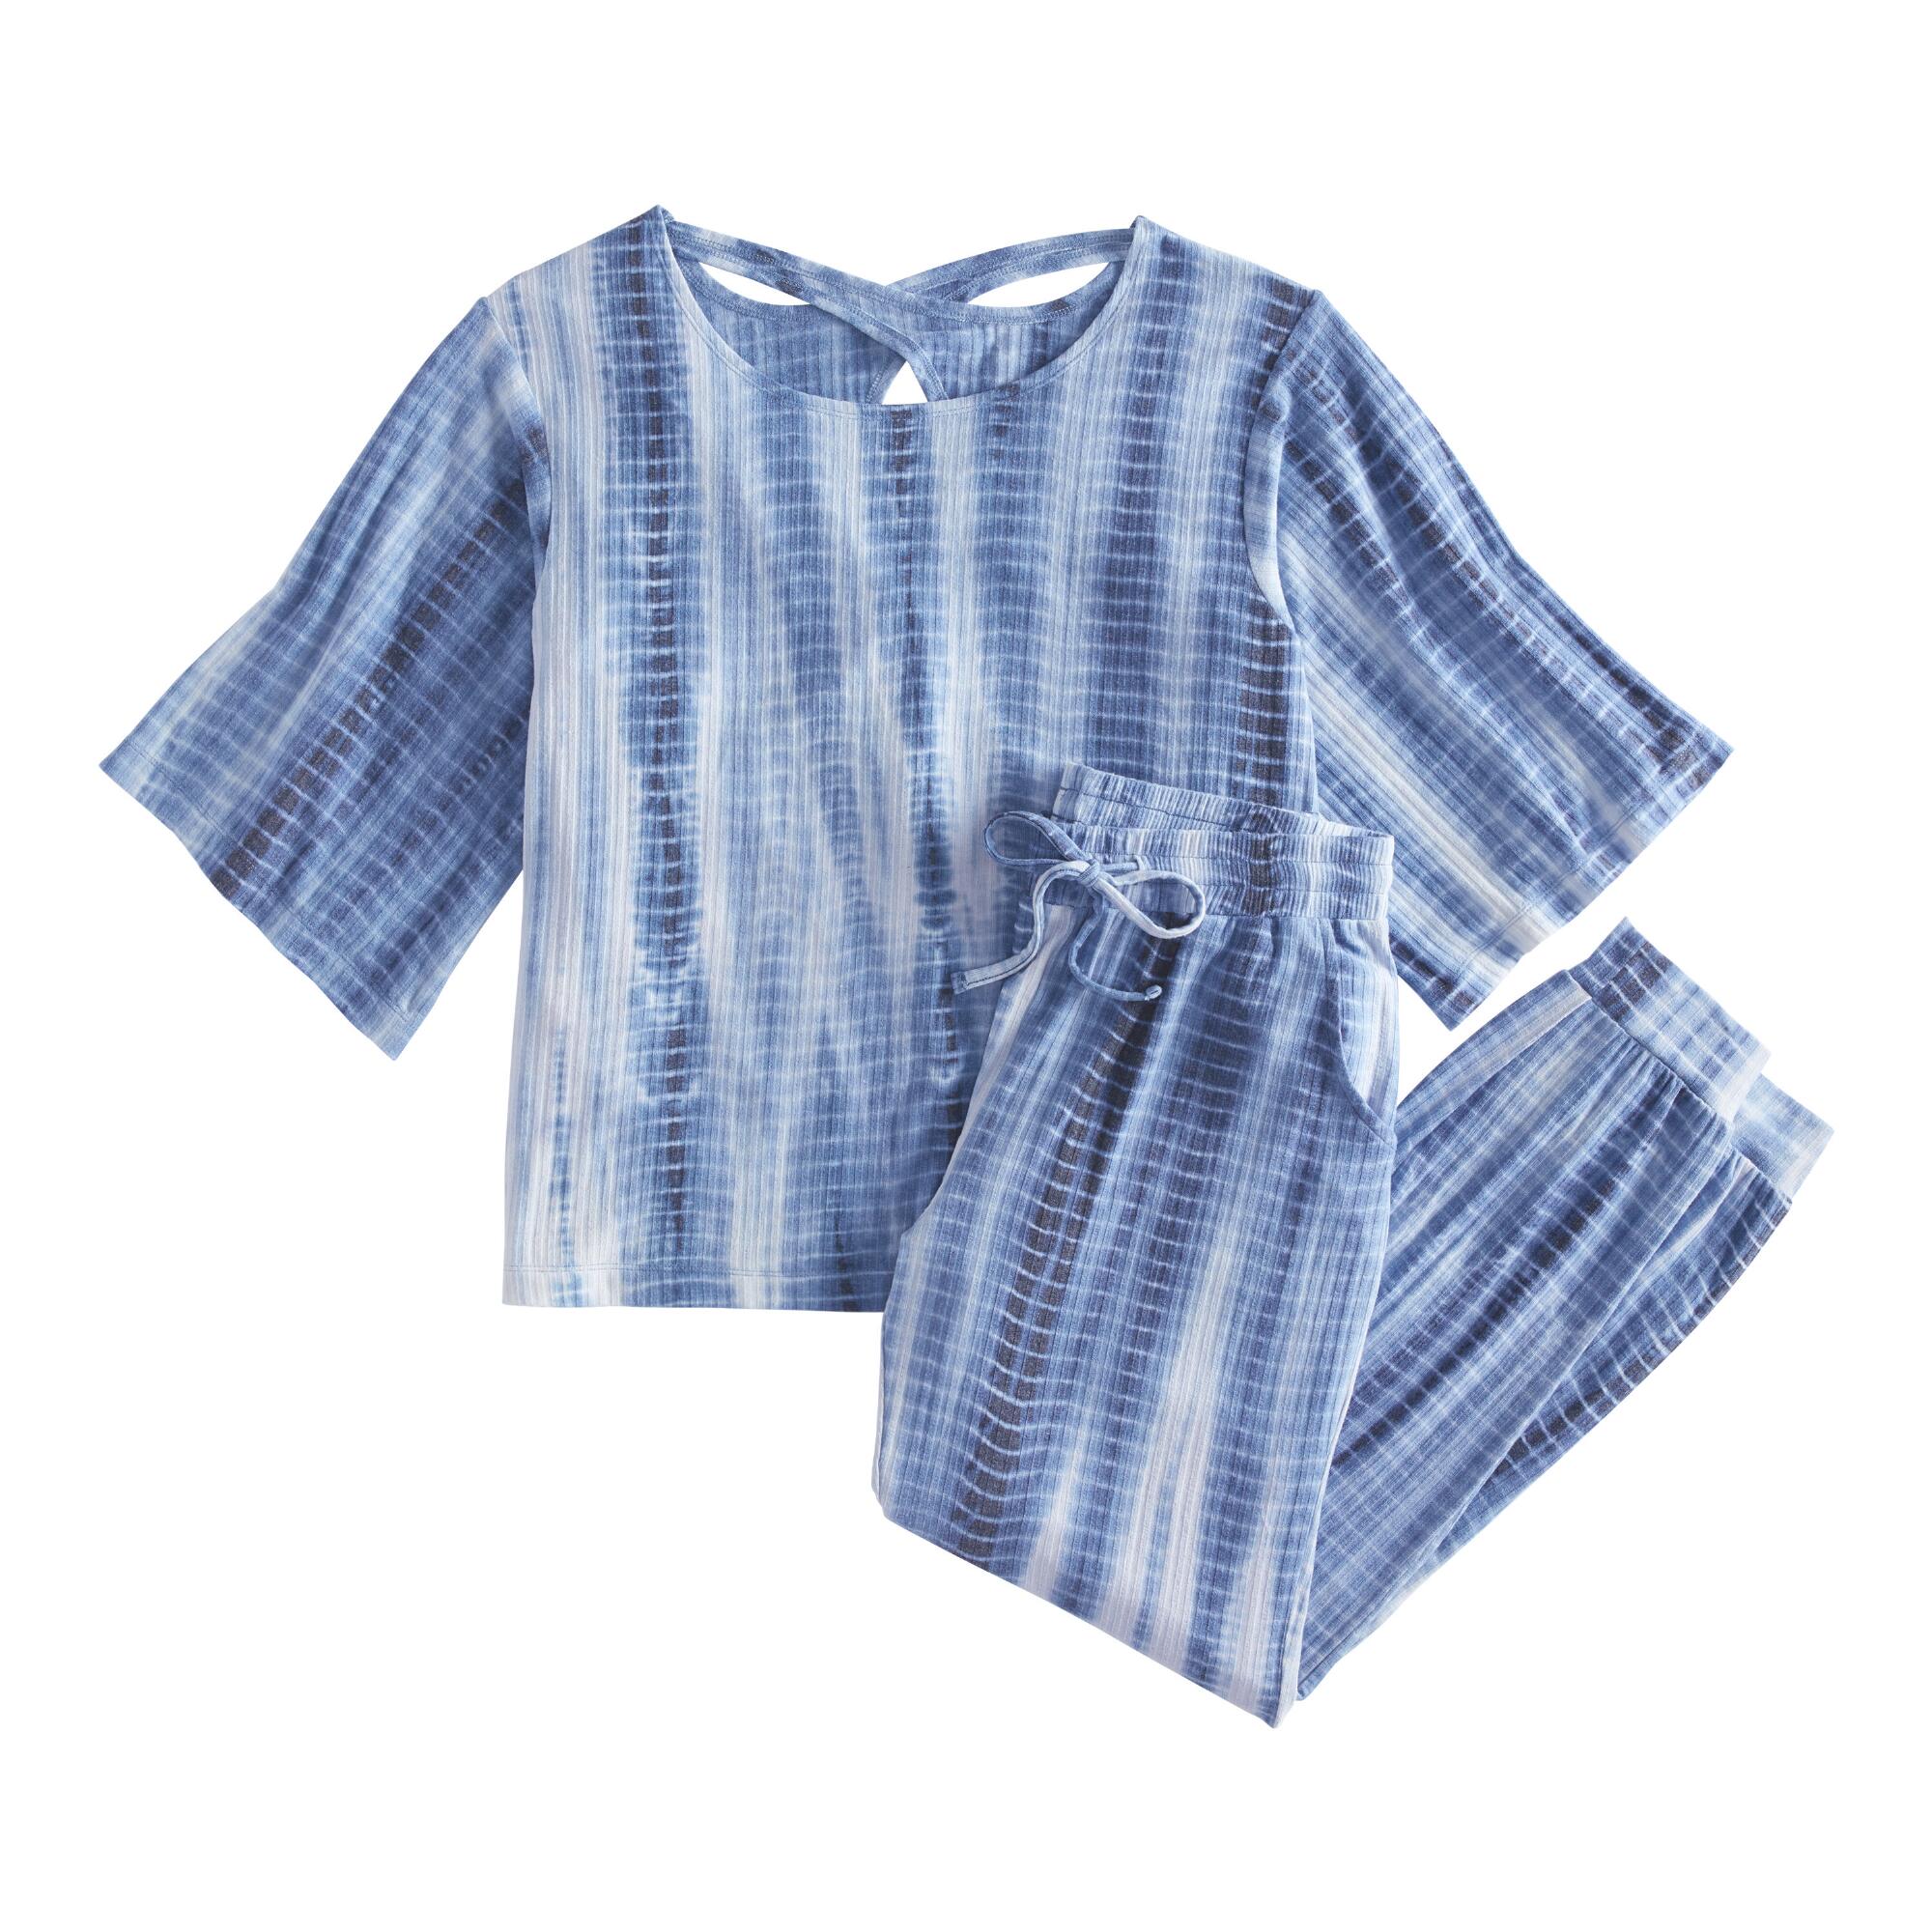 Indigo And White Tie Dye Loungewear Collection by World Market